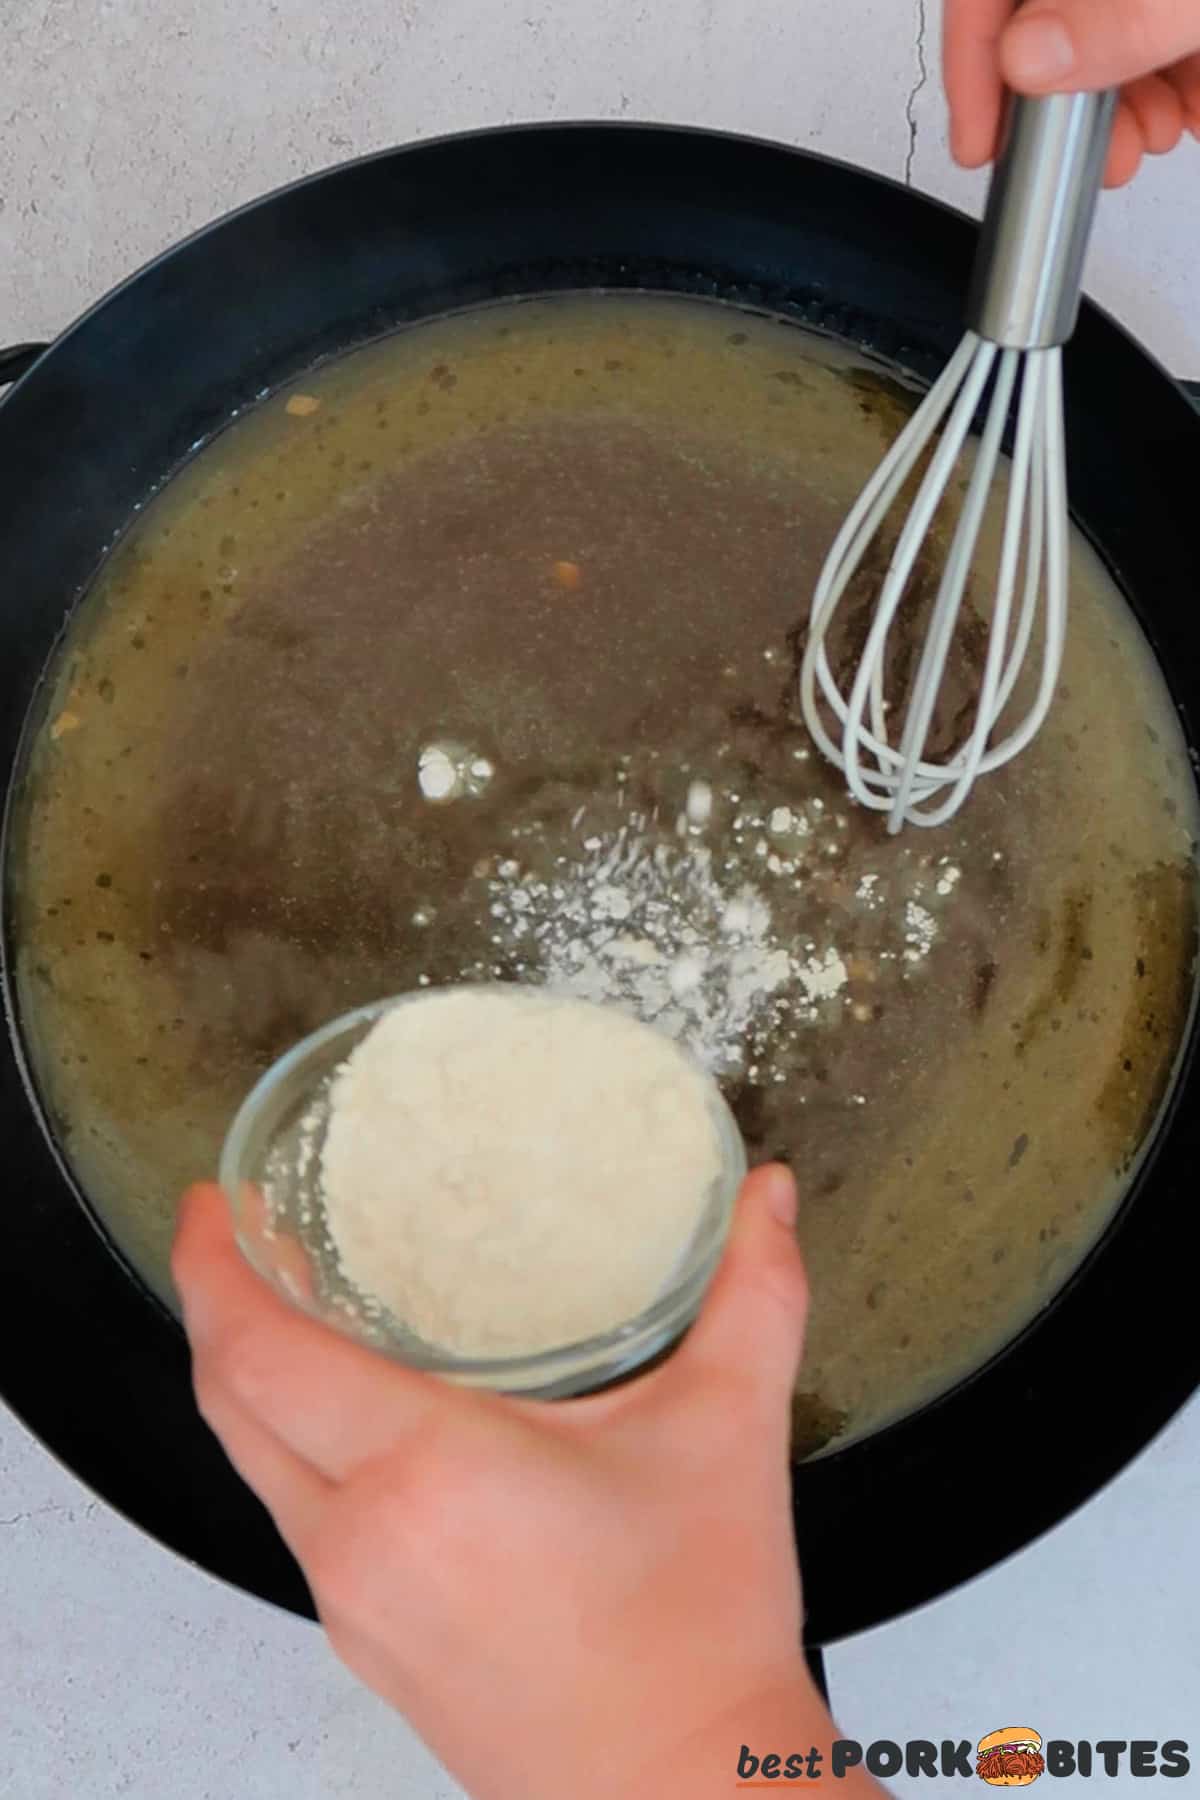 hands slowly pouring cornstarch into a pan of cooking gravy